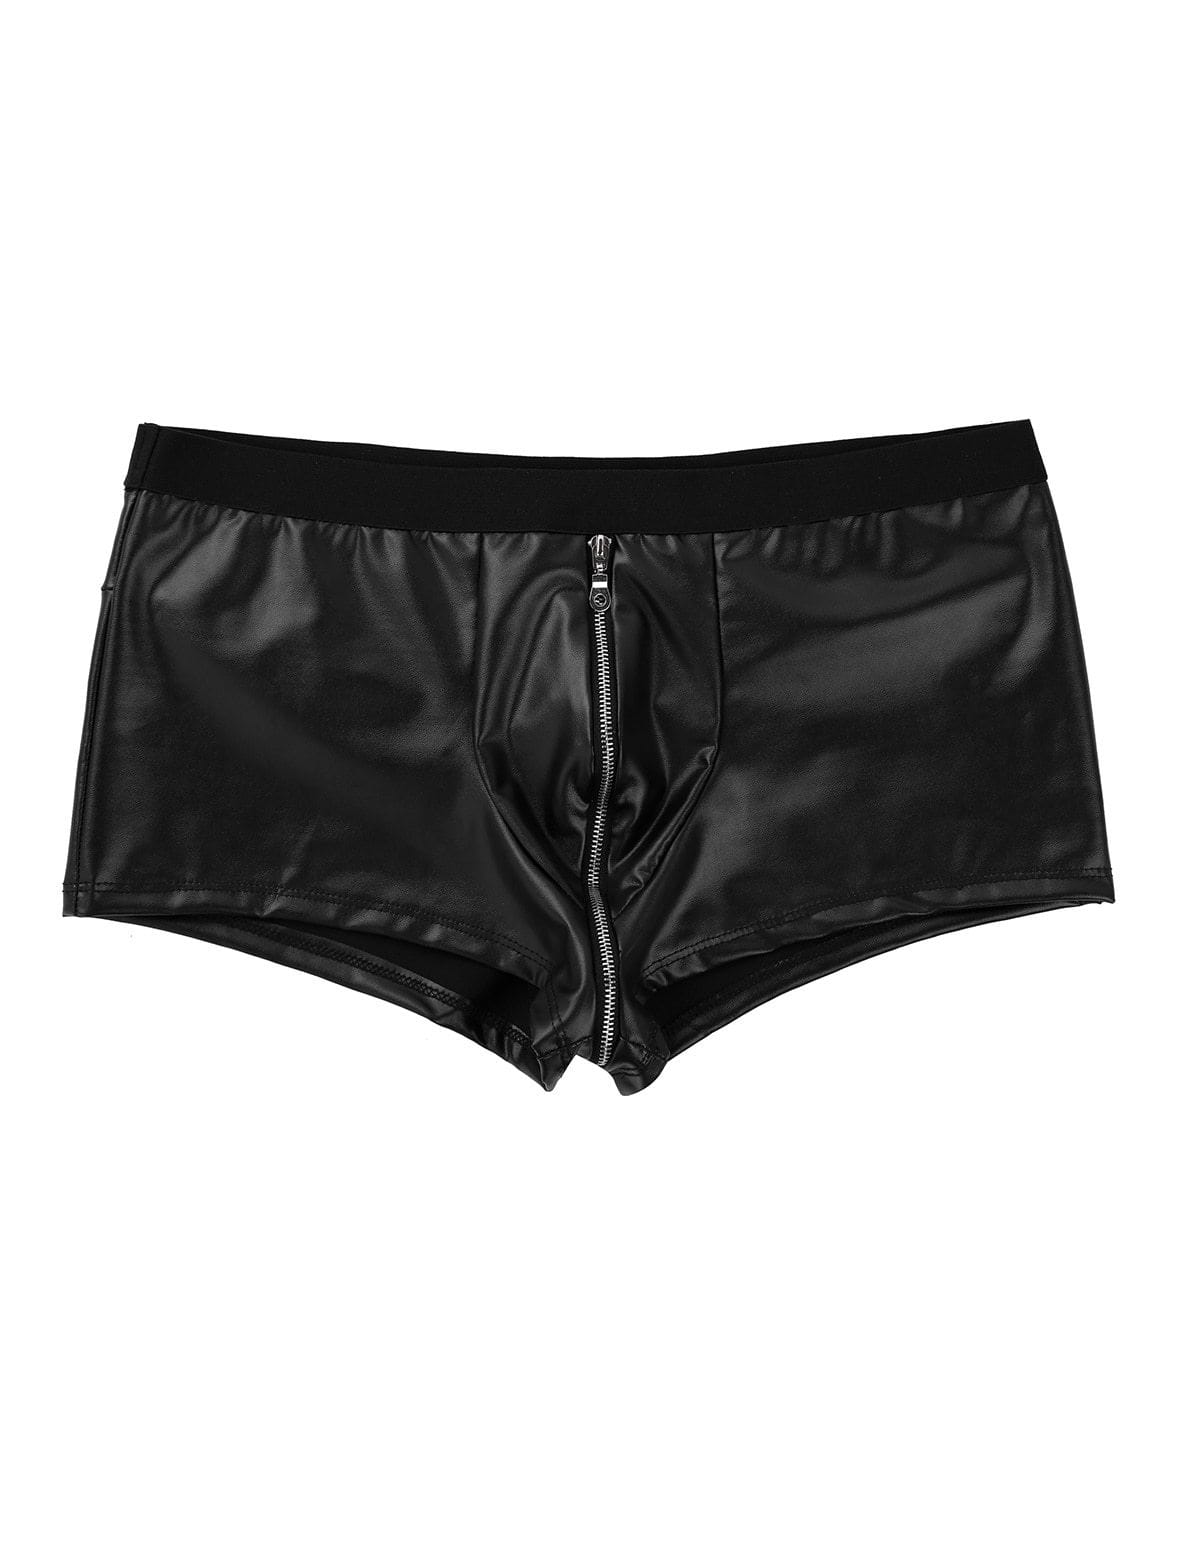 Faux Leather Zipper Boxer Shorts, Black Wetlook Zip Fitted